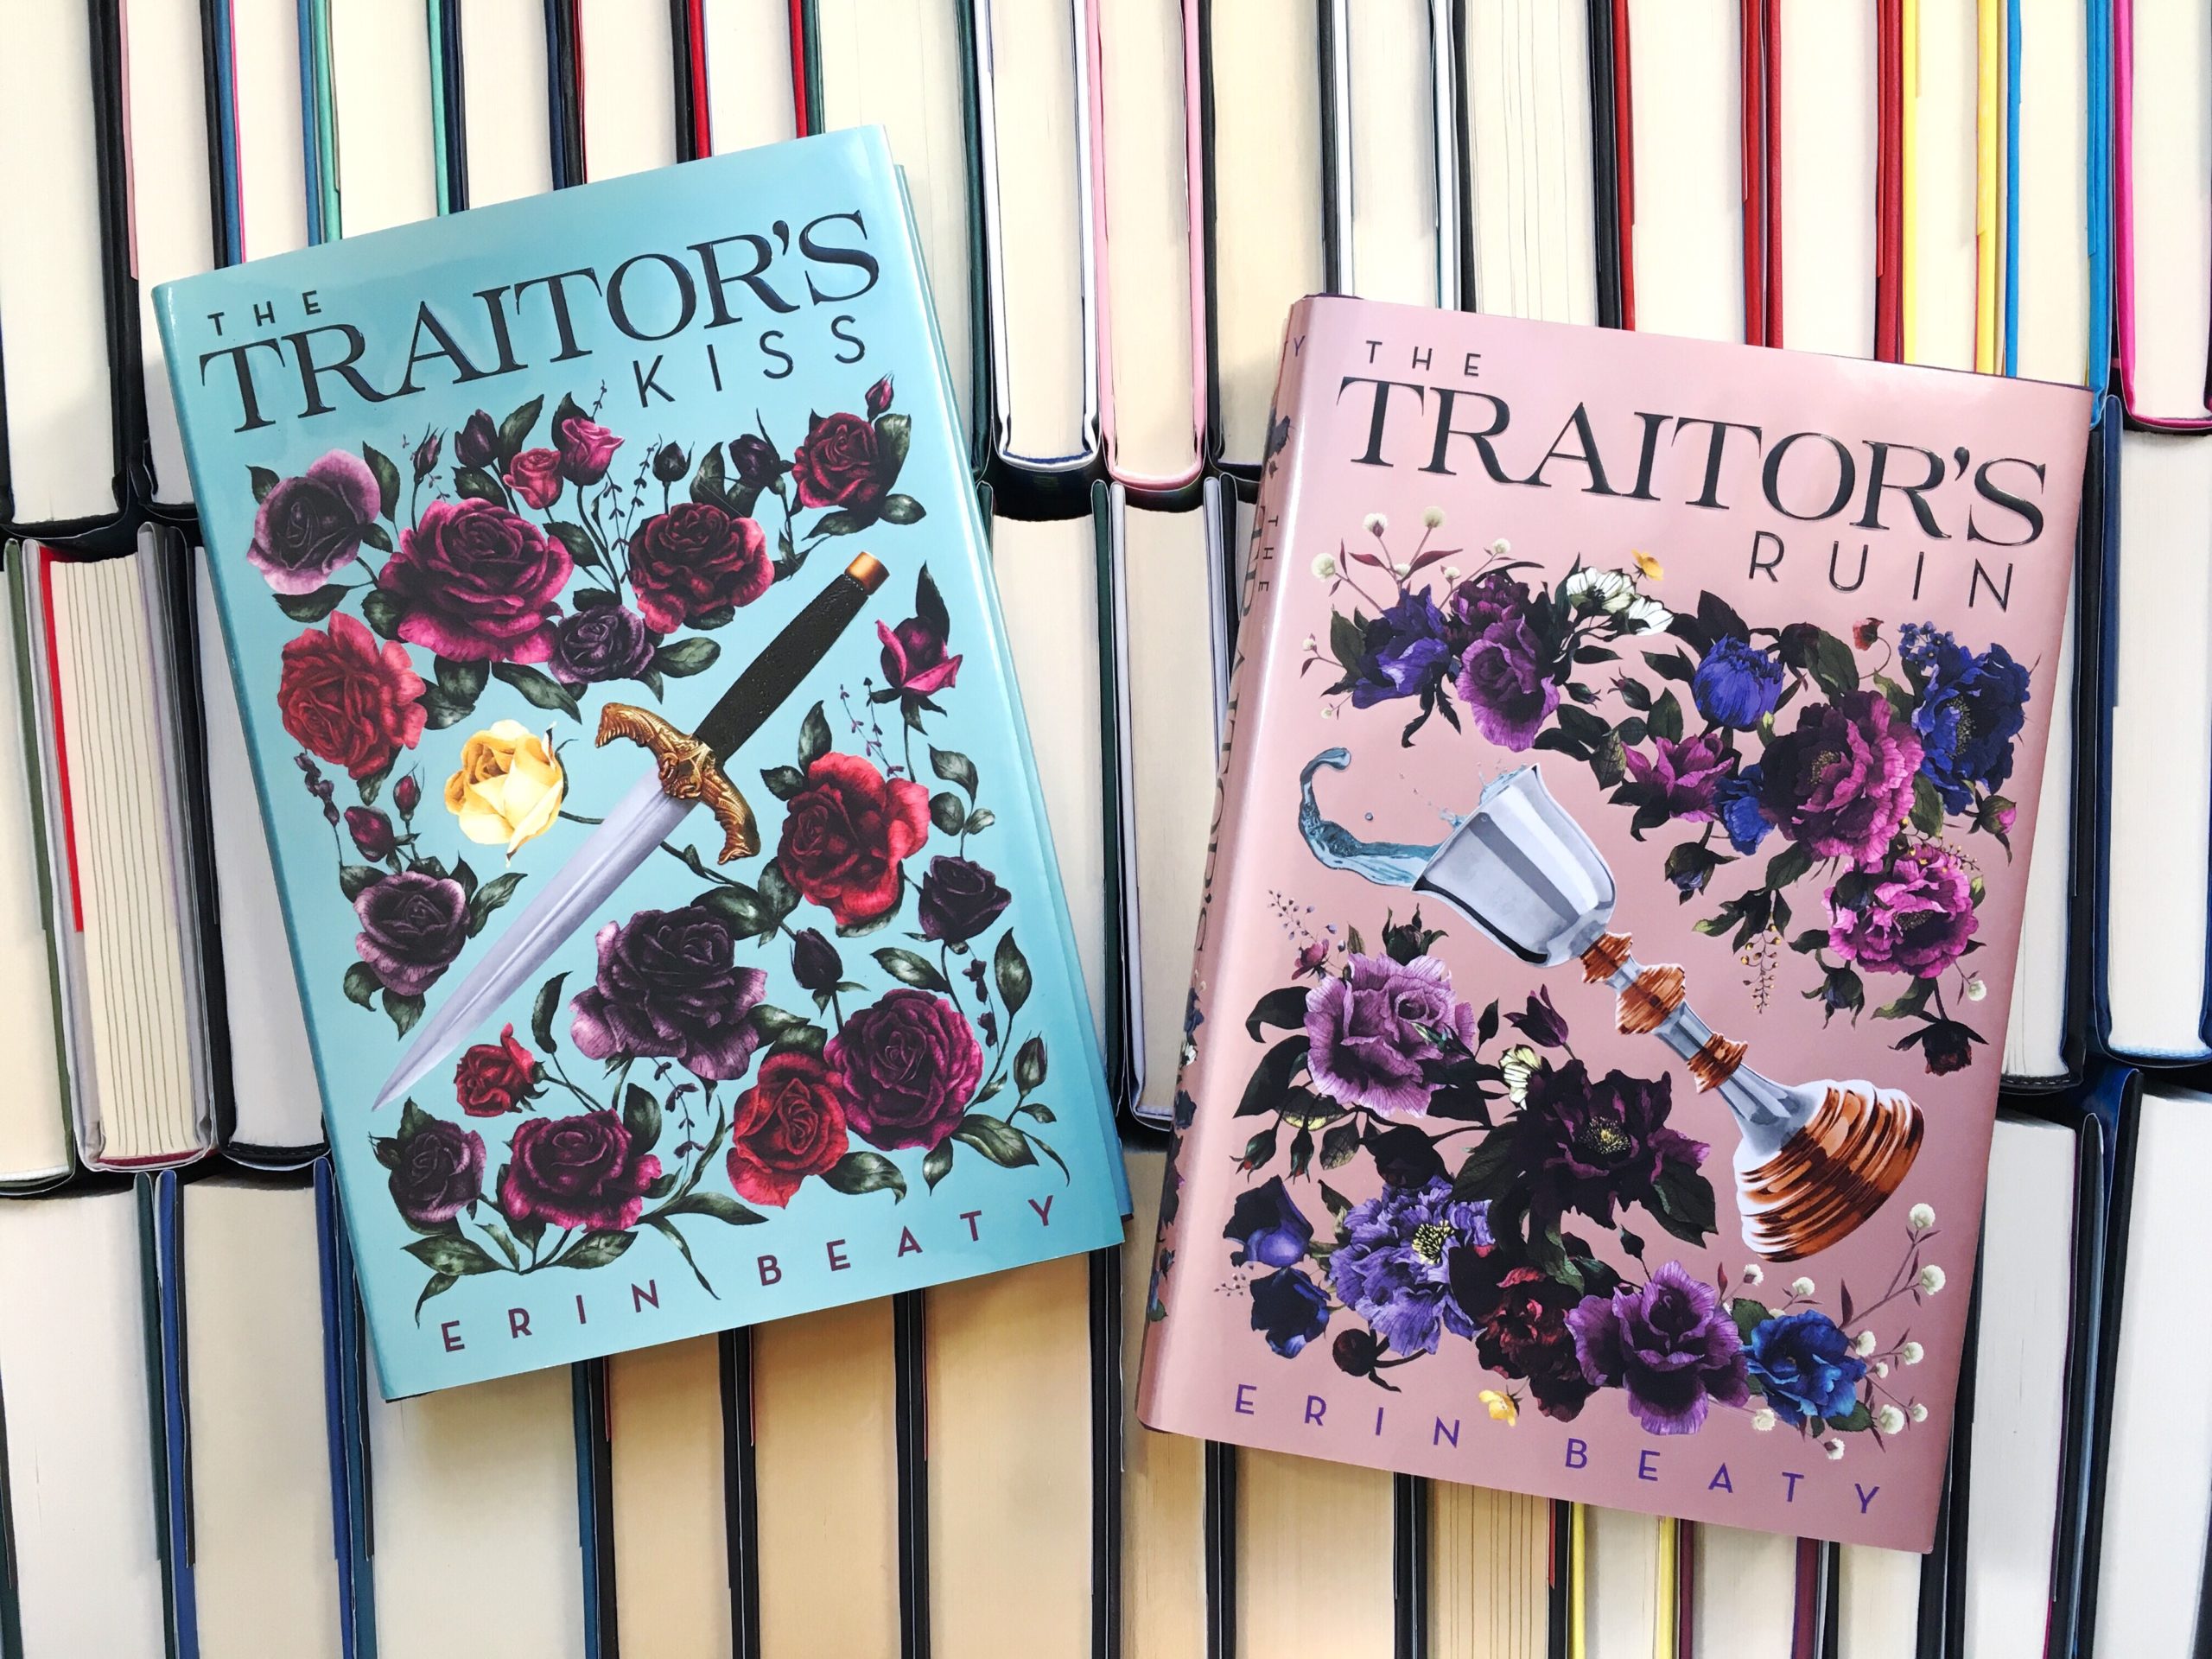 An Interview with Erin Beaty, Author of The Traitor’s Ruin